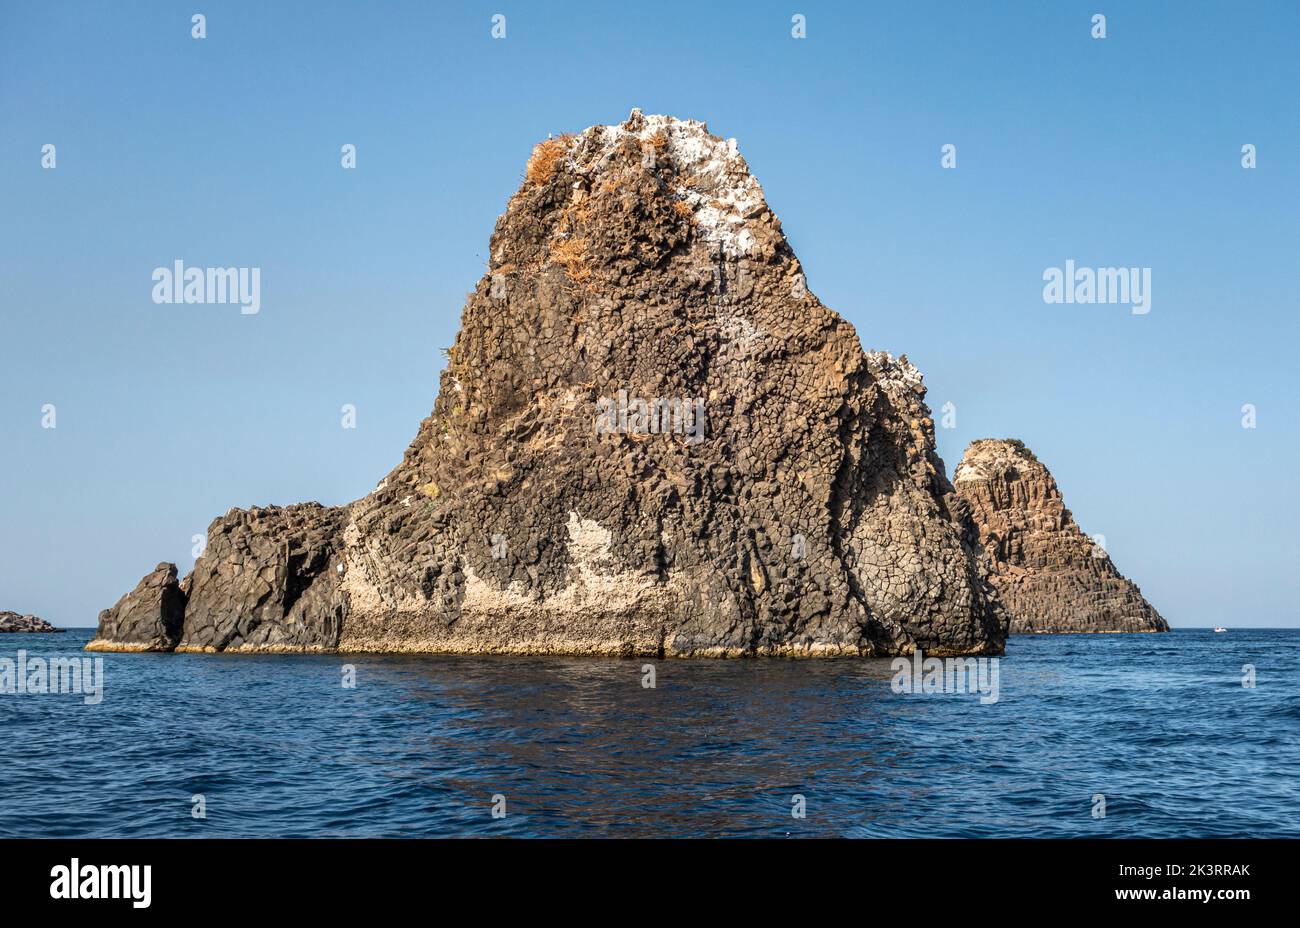 The Faraglioni or Isole dei Ciclopi (Cyclopean Islands), a group of volcanic basalt sea stacks just off the coast at Aci Trezza, Sicily, Italy Stock Photo